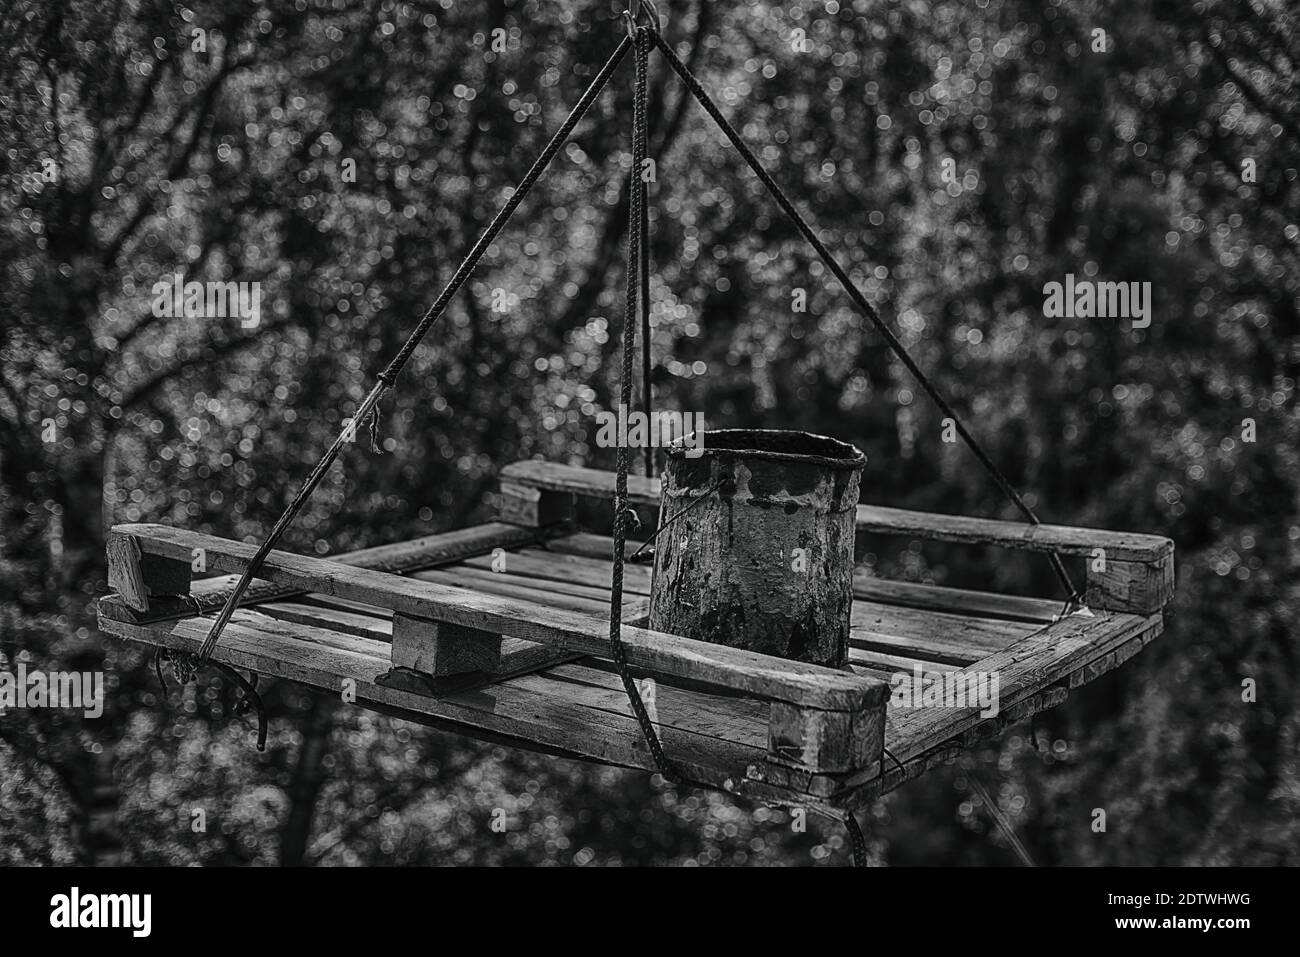 Old bucket on a wooden suspended platform against a lush foliage. Overhaul, construction works and obsolete equipment theme. Low key black and white p Stock Photo